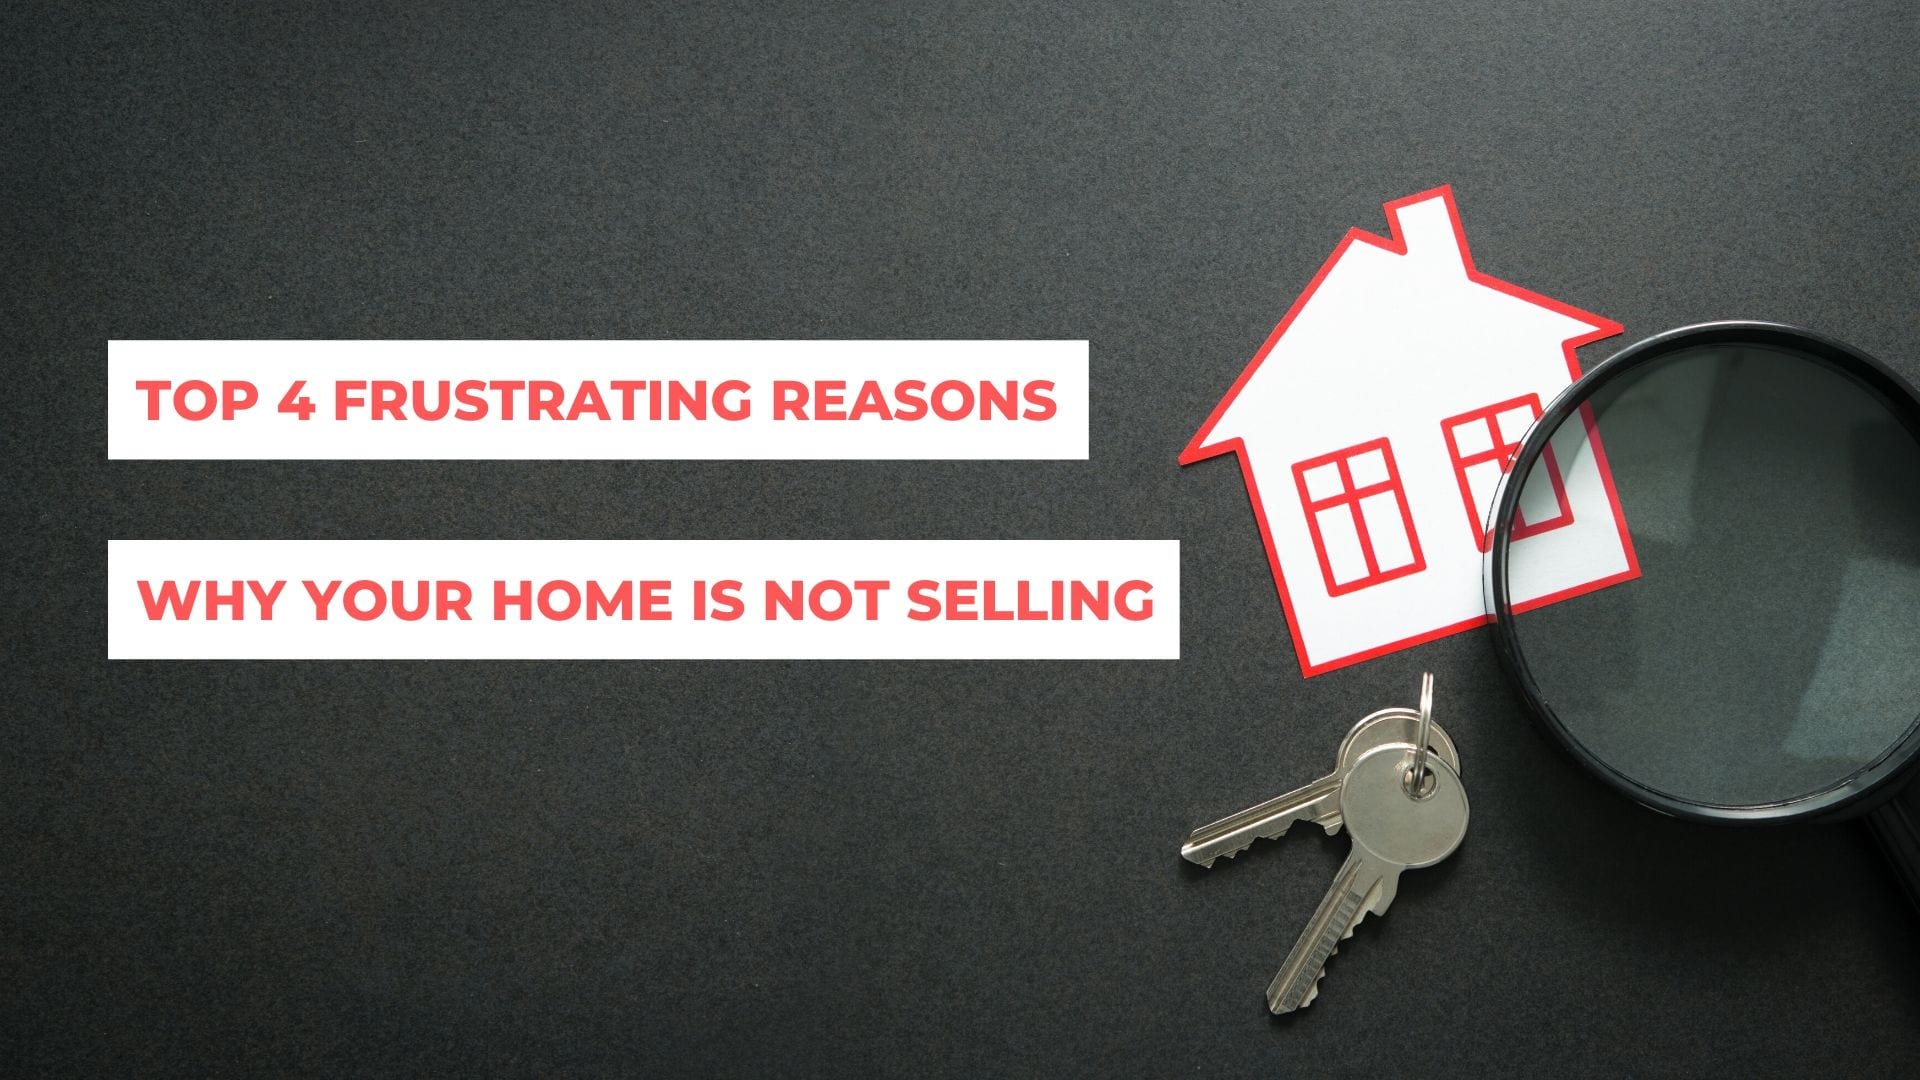 Top 4 Frustrating Reasons Why Your Home Is Not Selling DealHouse